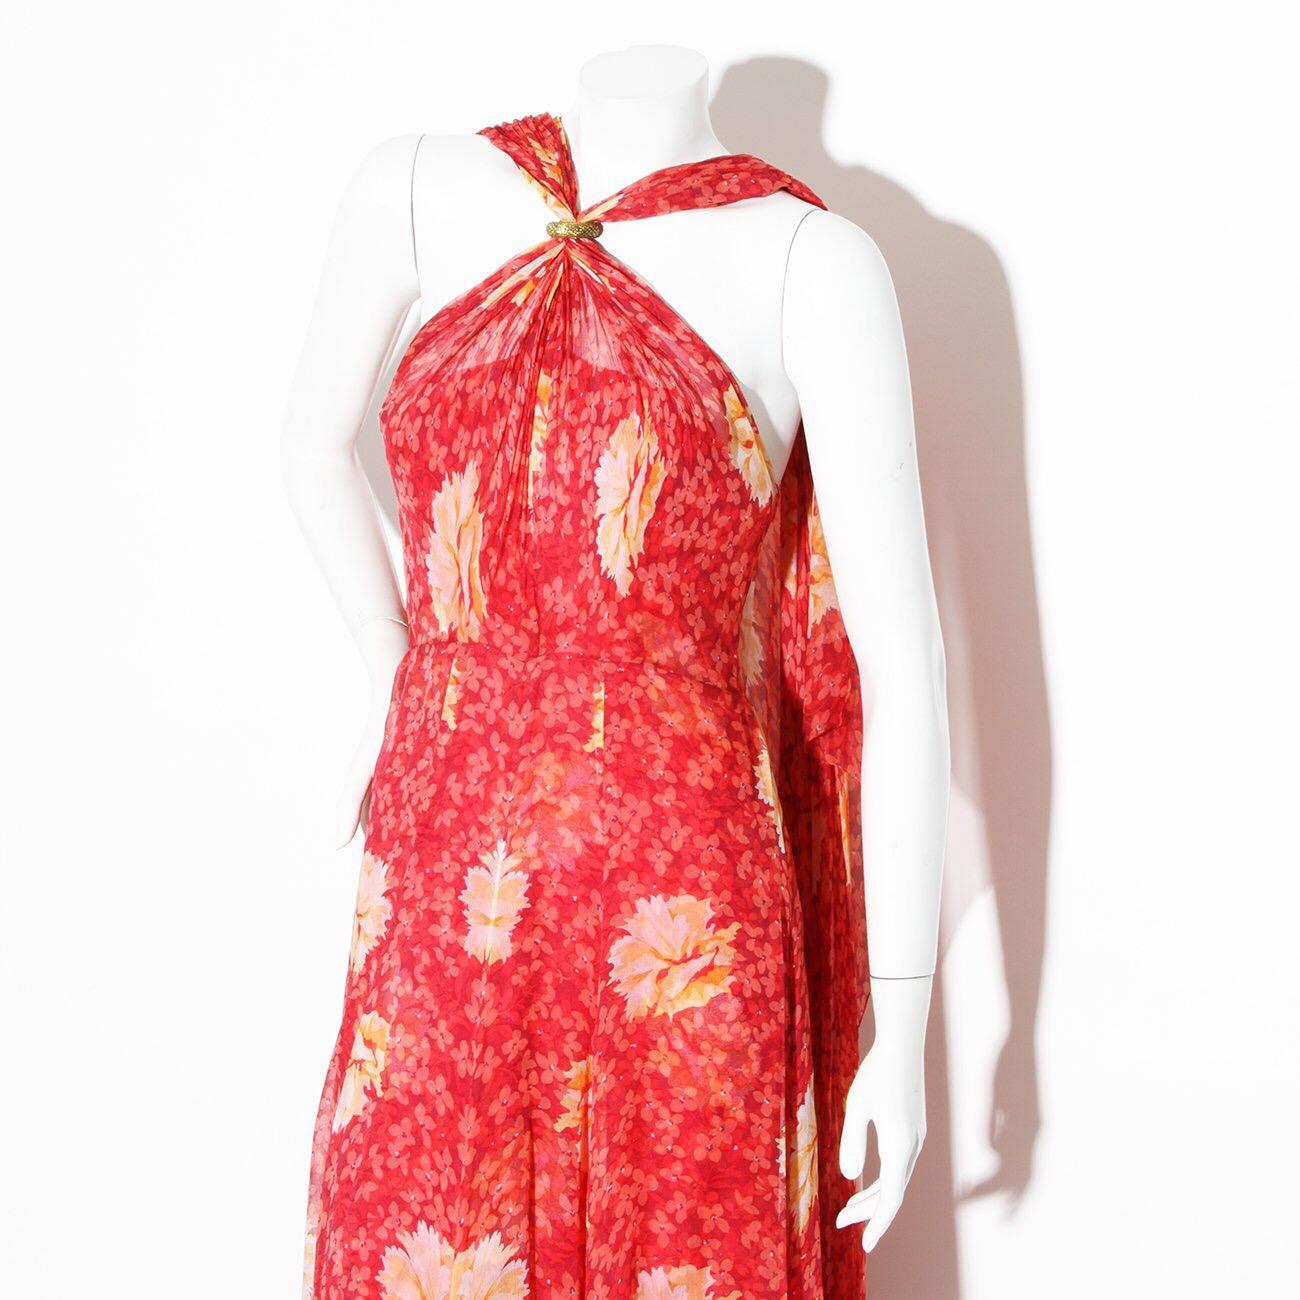 Product Details:
Vintage Haute Couture chiffon gown by Chanel
Lifetime Chanel Piece 
Late 60's Early 70's 
Halter top with gold clasp closure 
Clasp that holds halter is signed by Robert Goossens  
Bias cut chiffon fabric
Floral Print 
Zipper